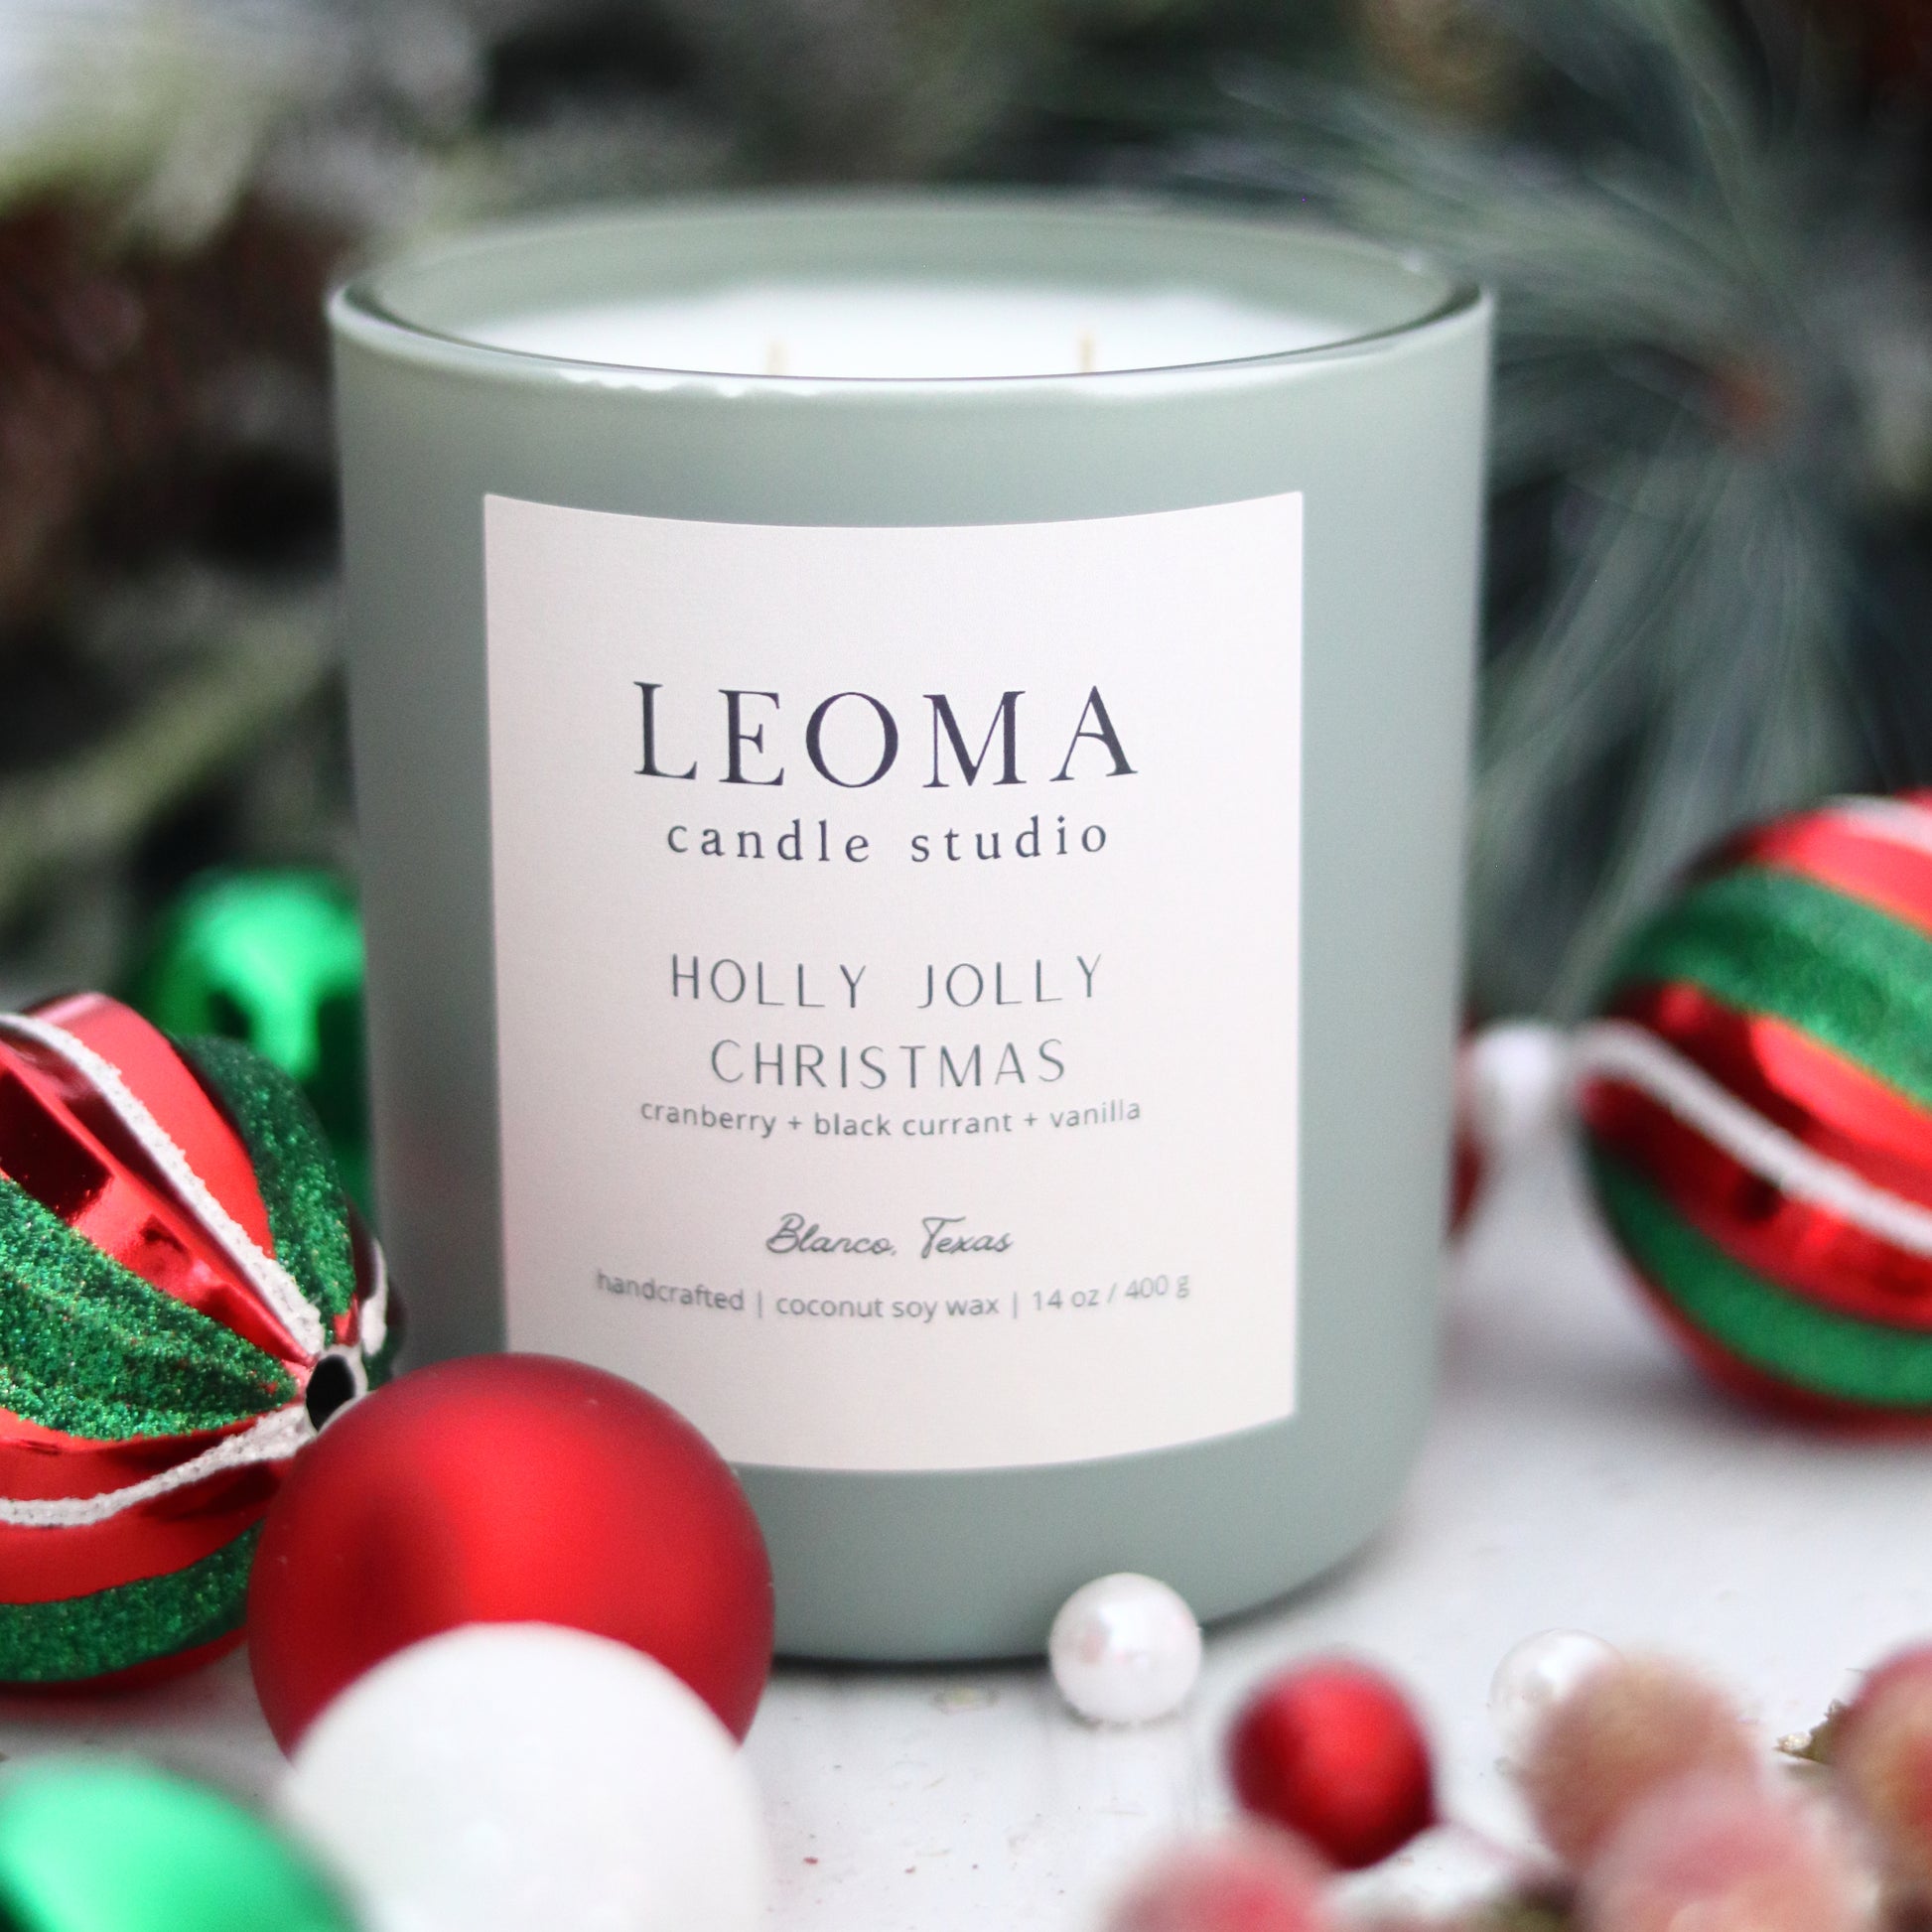 Handcrafted eco-friendly scented candle. Natural coconut & soy wax, toxin-free, 100% cotton wicks. Sage vessel. Holly Jolly Christmas scented.